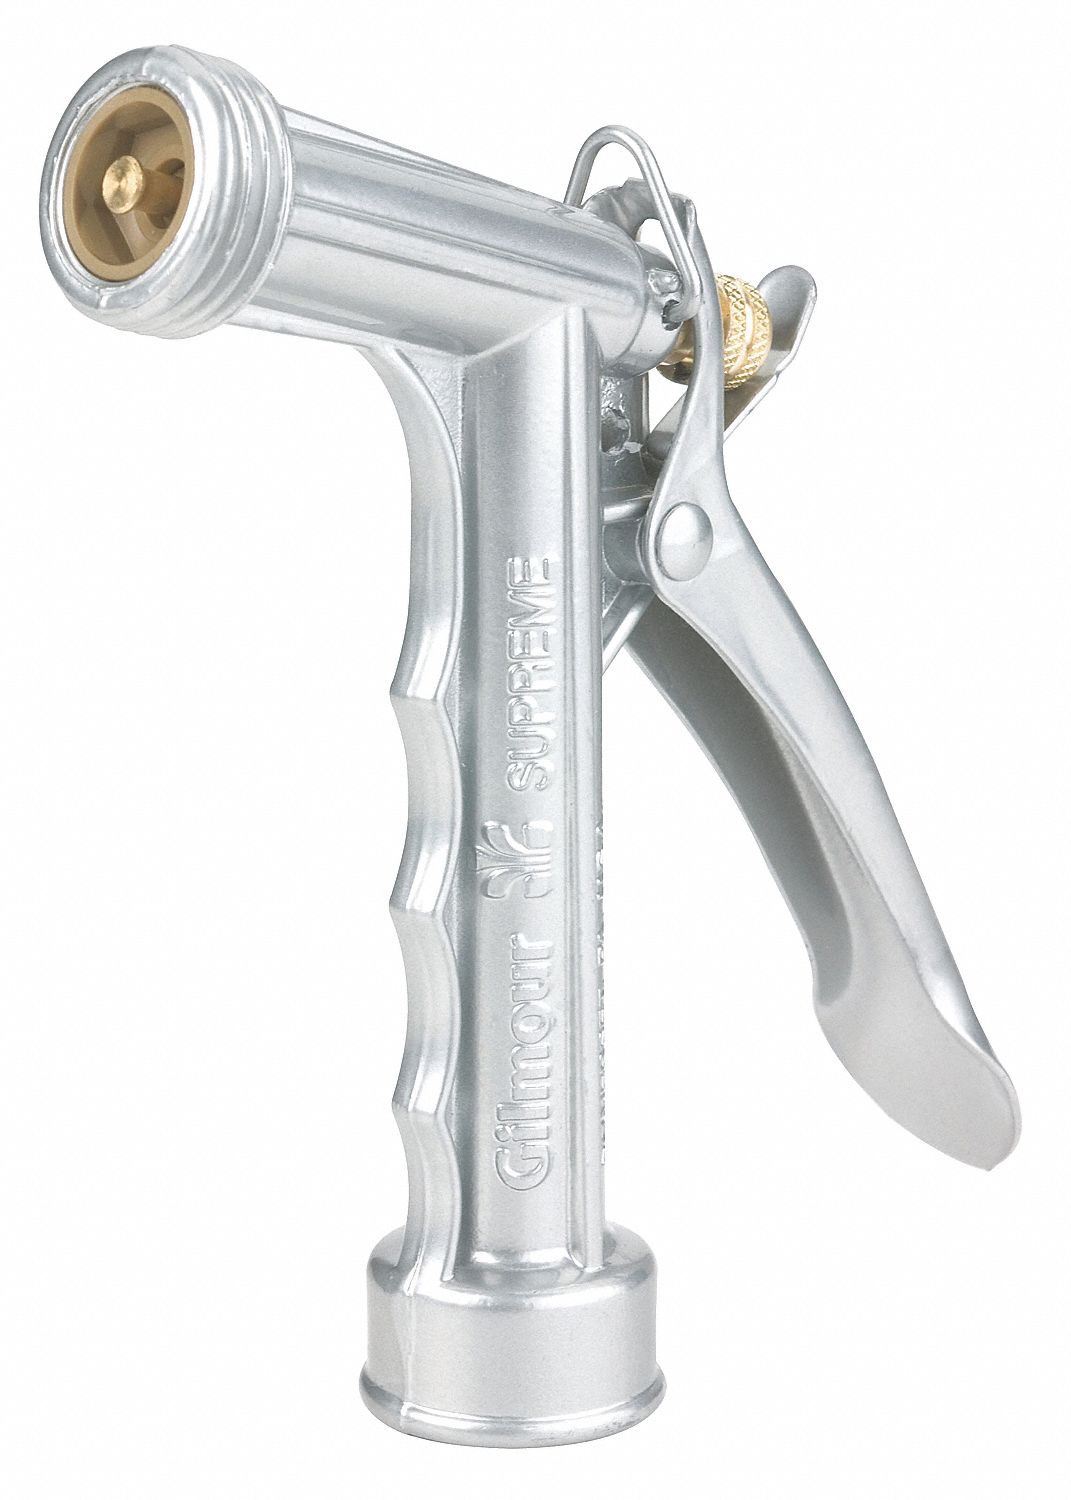 Water Nozzle: 60 psi Max. Pressure, Trigger, 3/4 in GHT, Brass Stem/Steel Exterior, Metal